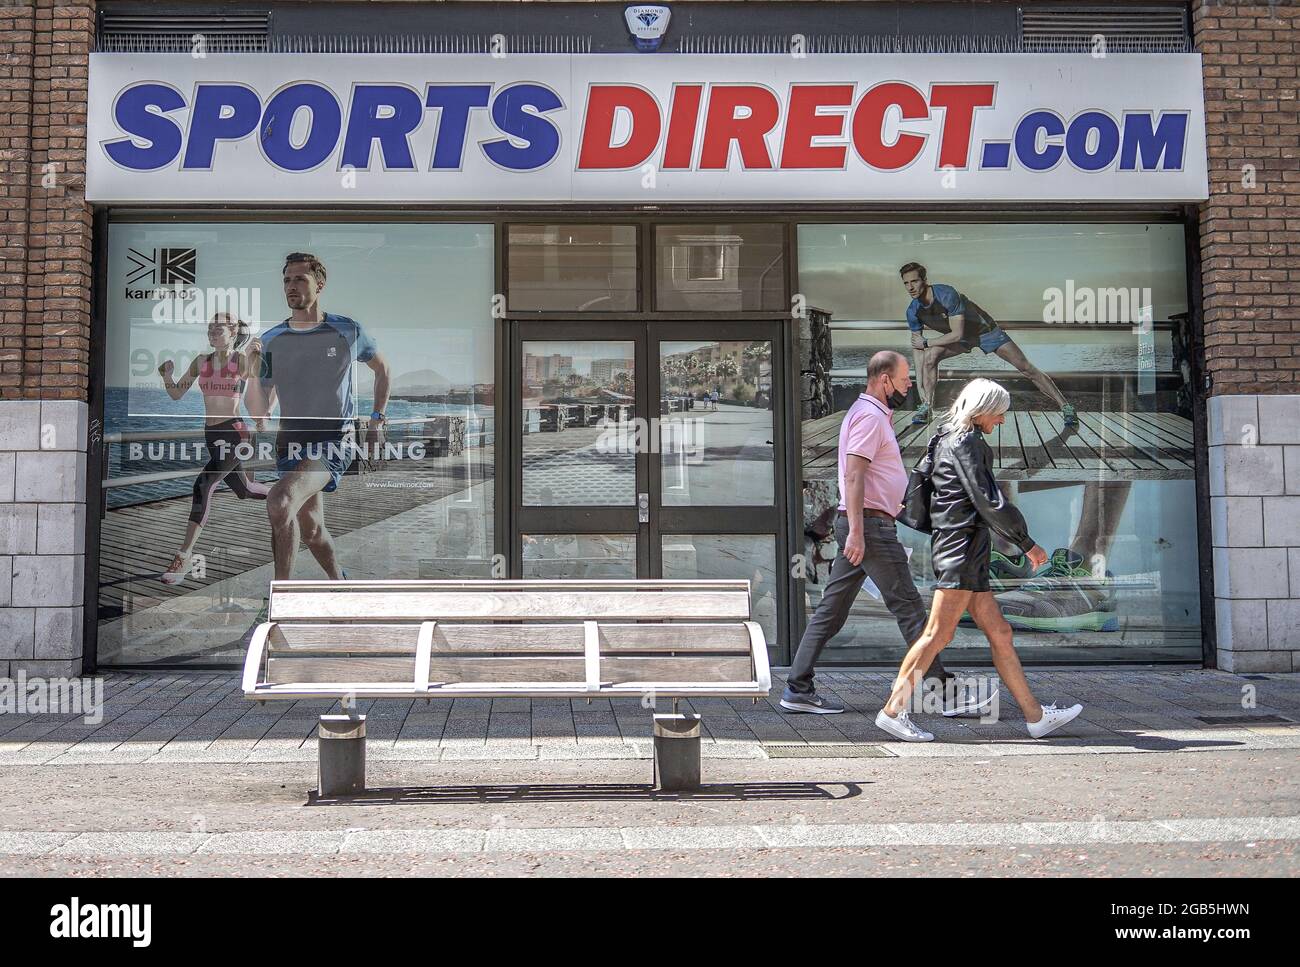 Sports Direct on the App Store